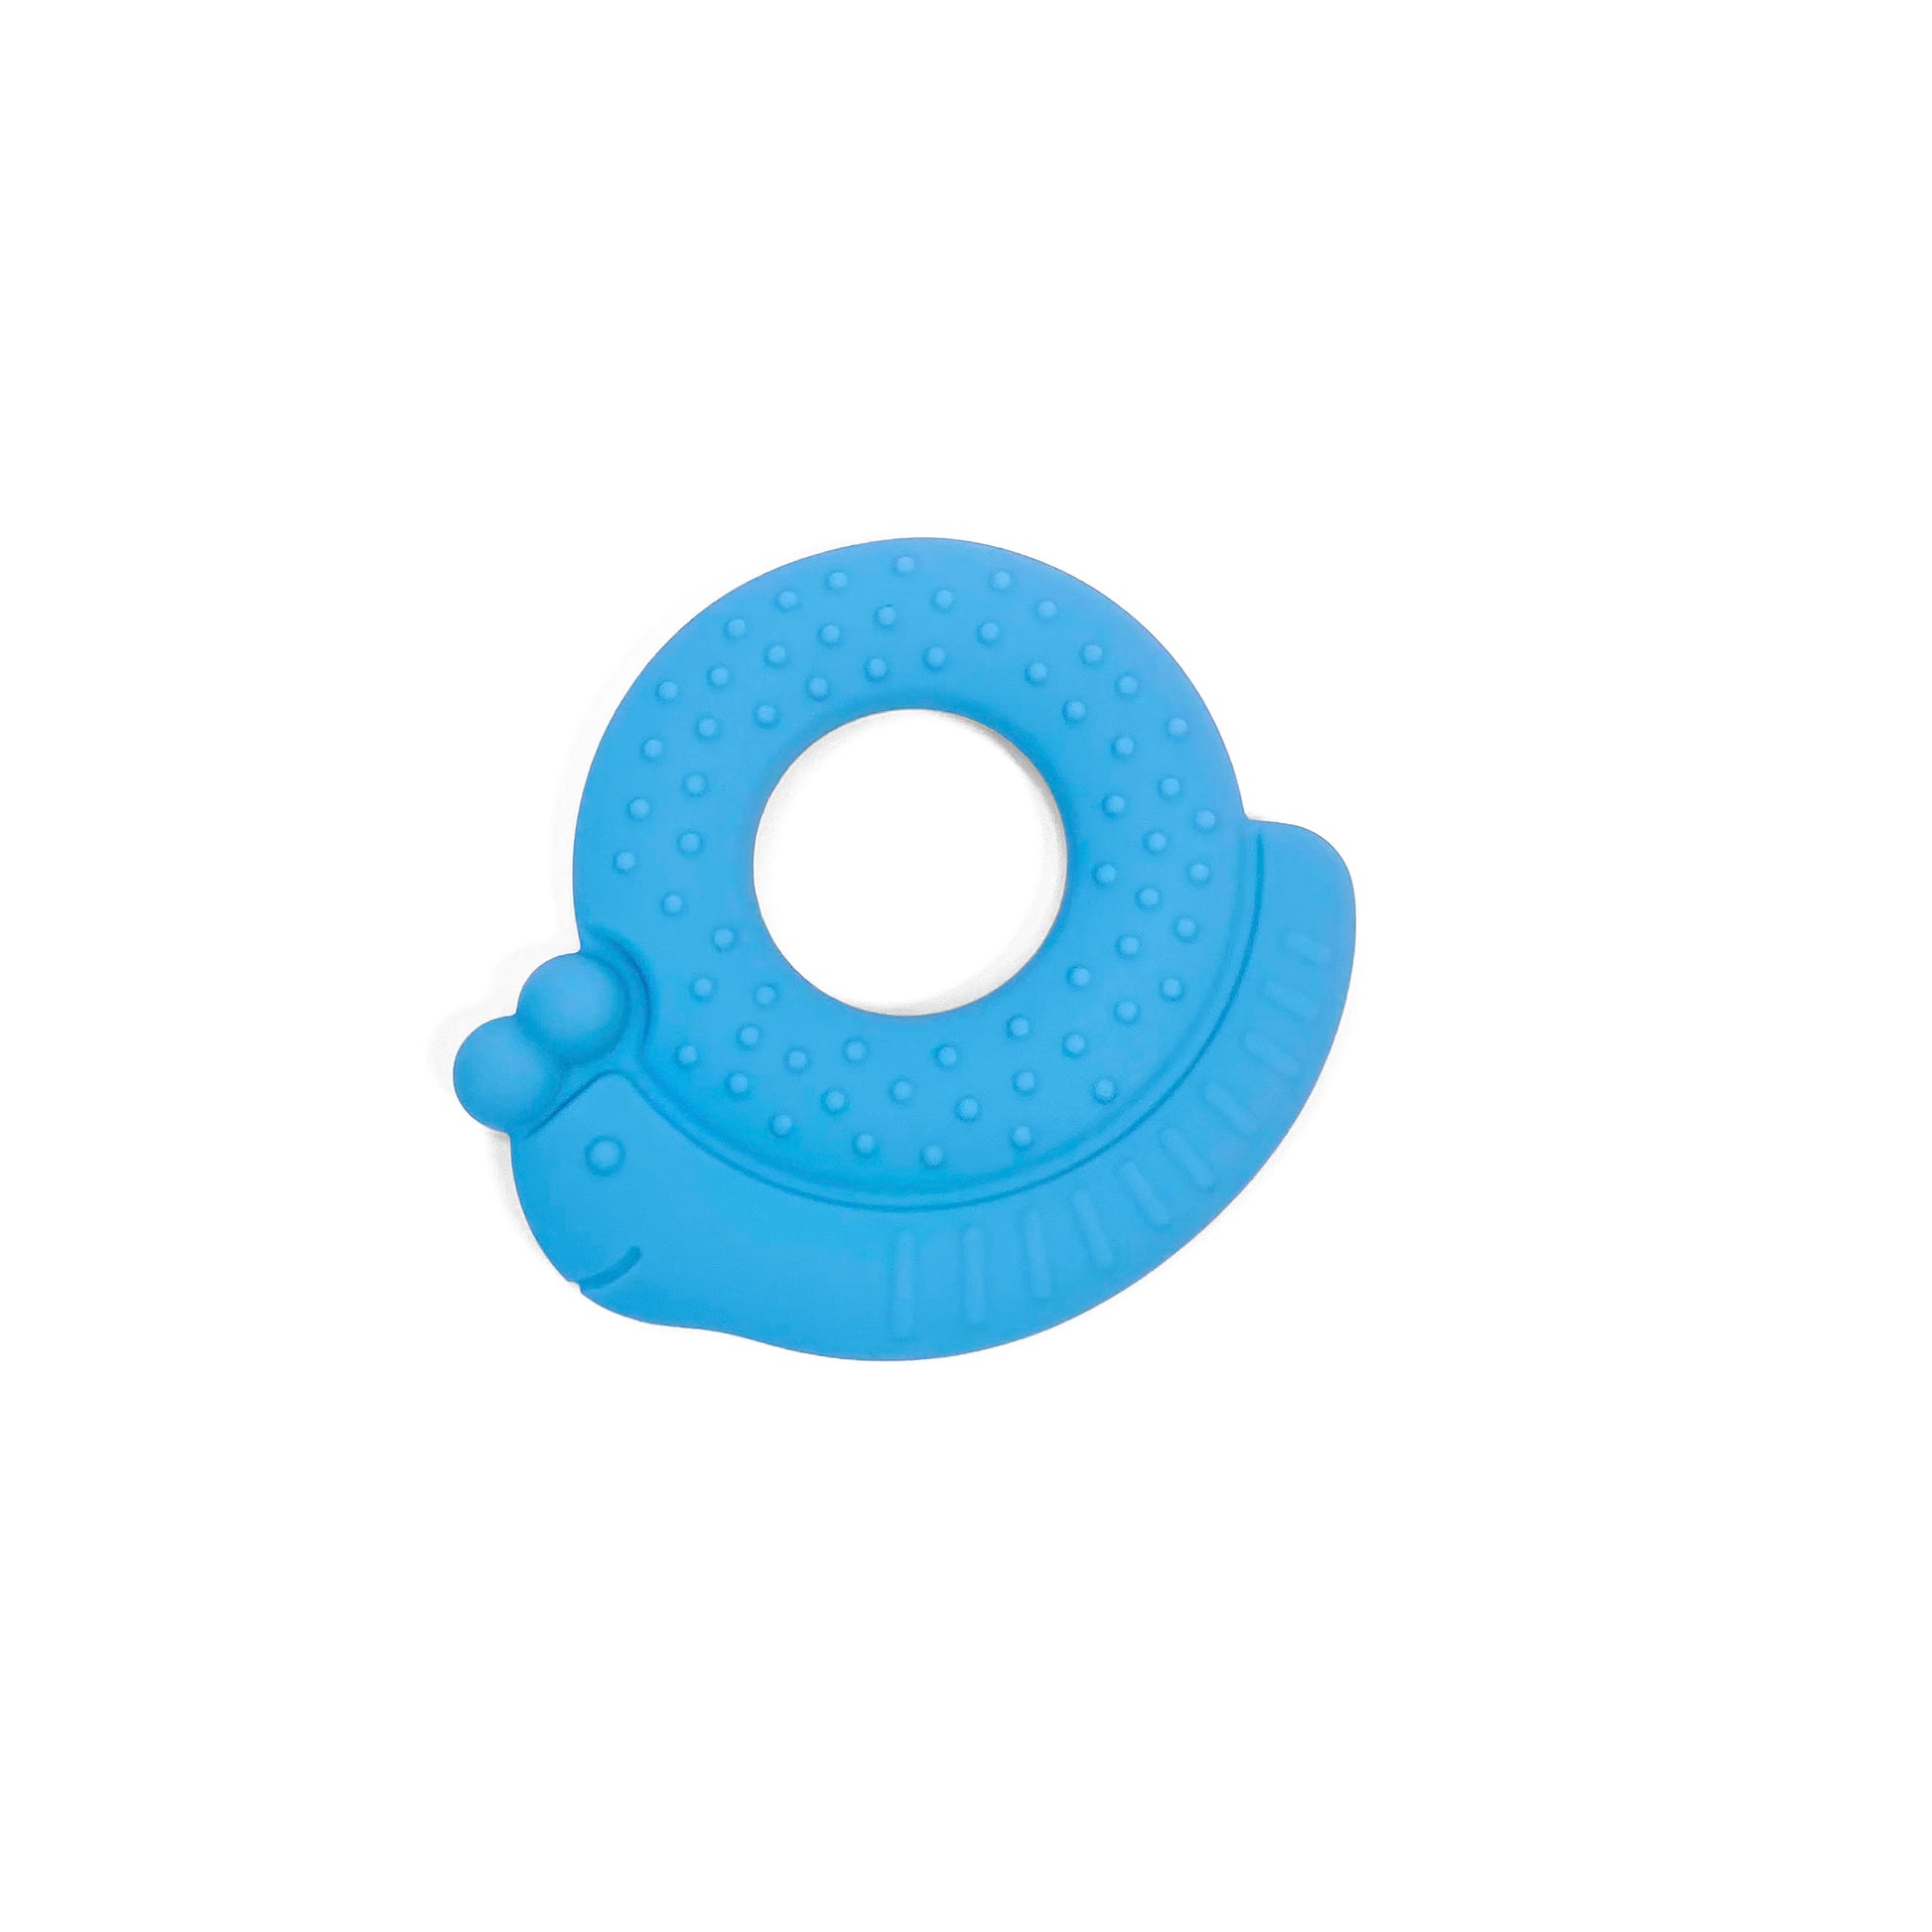 A children’s blue silicone teething toy, in a snail design.